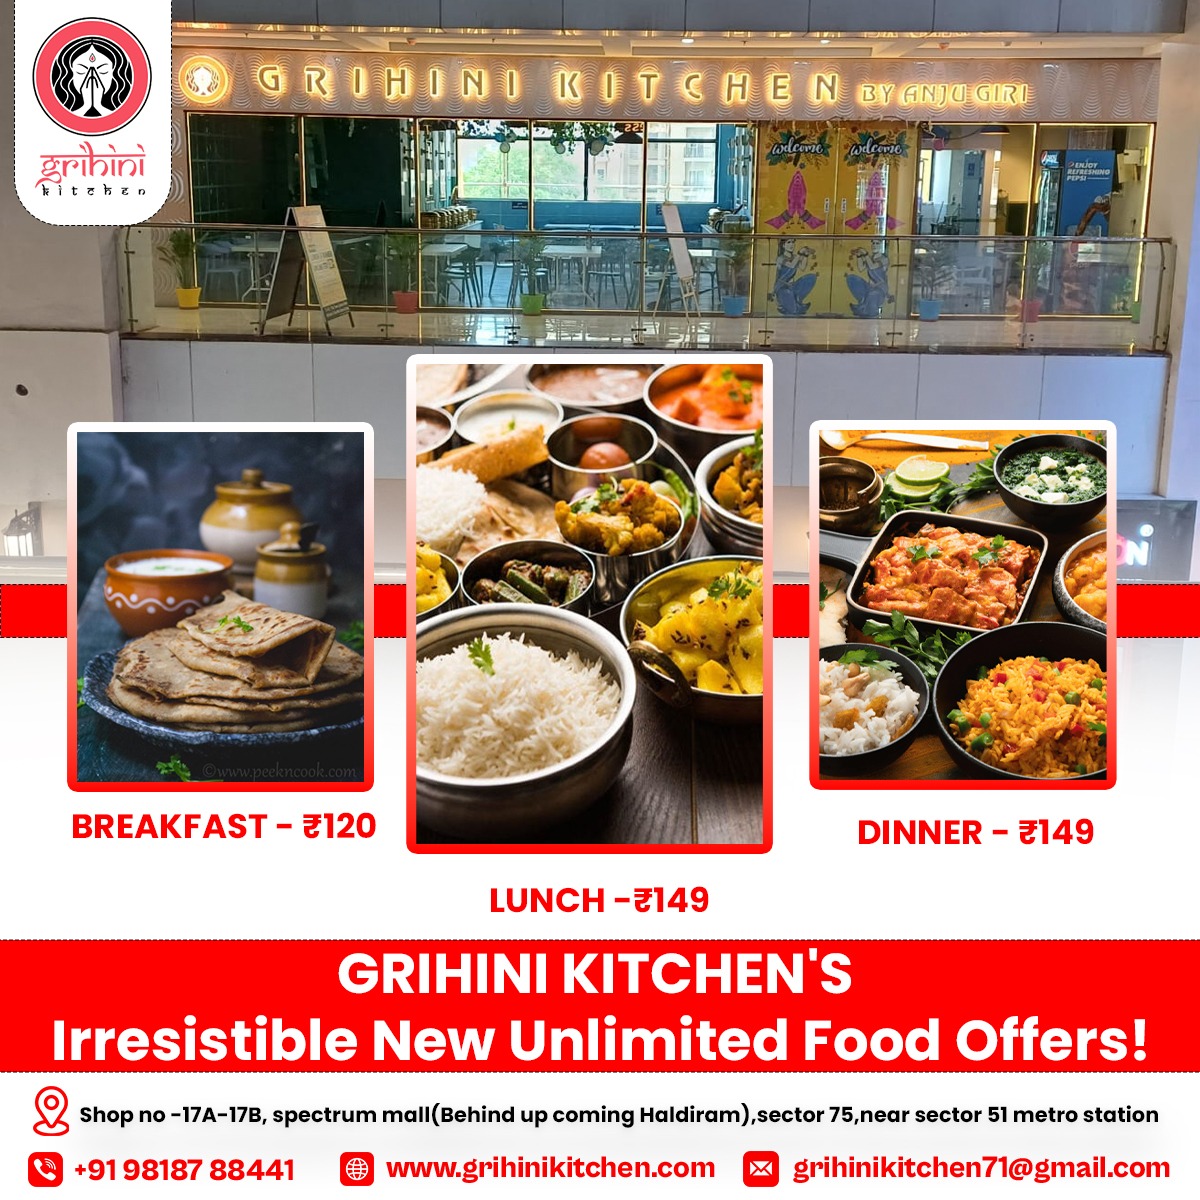 🌟✨ Now offering even greater value at Grihini Kitchen Outlet! ✨🌟 Indulge in unlimited deliciousness without breaking the bank. Your taste buds and wallet will thank you! Hurry in for an unbeatable dining experience. #MoreValue #UnlimitedJoy 🍽️🥳